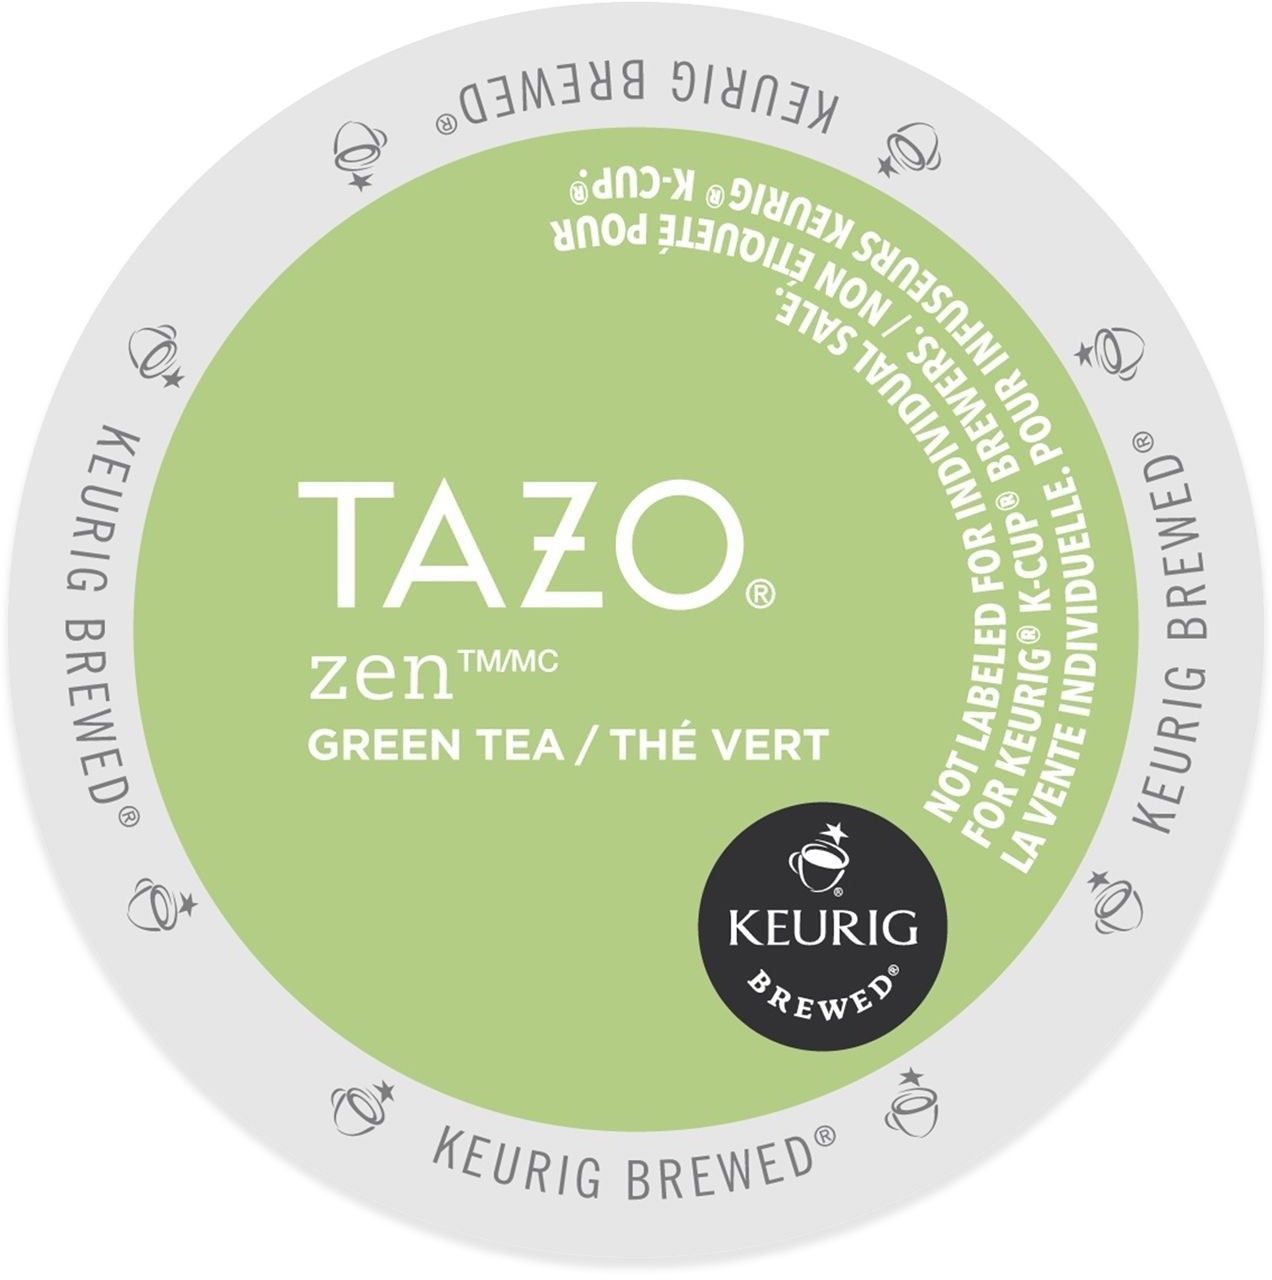 Tazo Zen Green Tea  22 to 132 Keurig K cup Pods Pick Any Size FREE SHIPPING  - $29.89 - $129.89